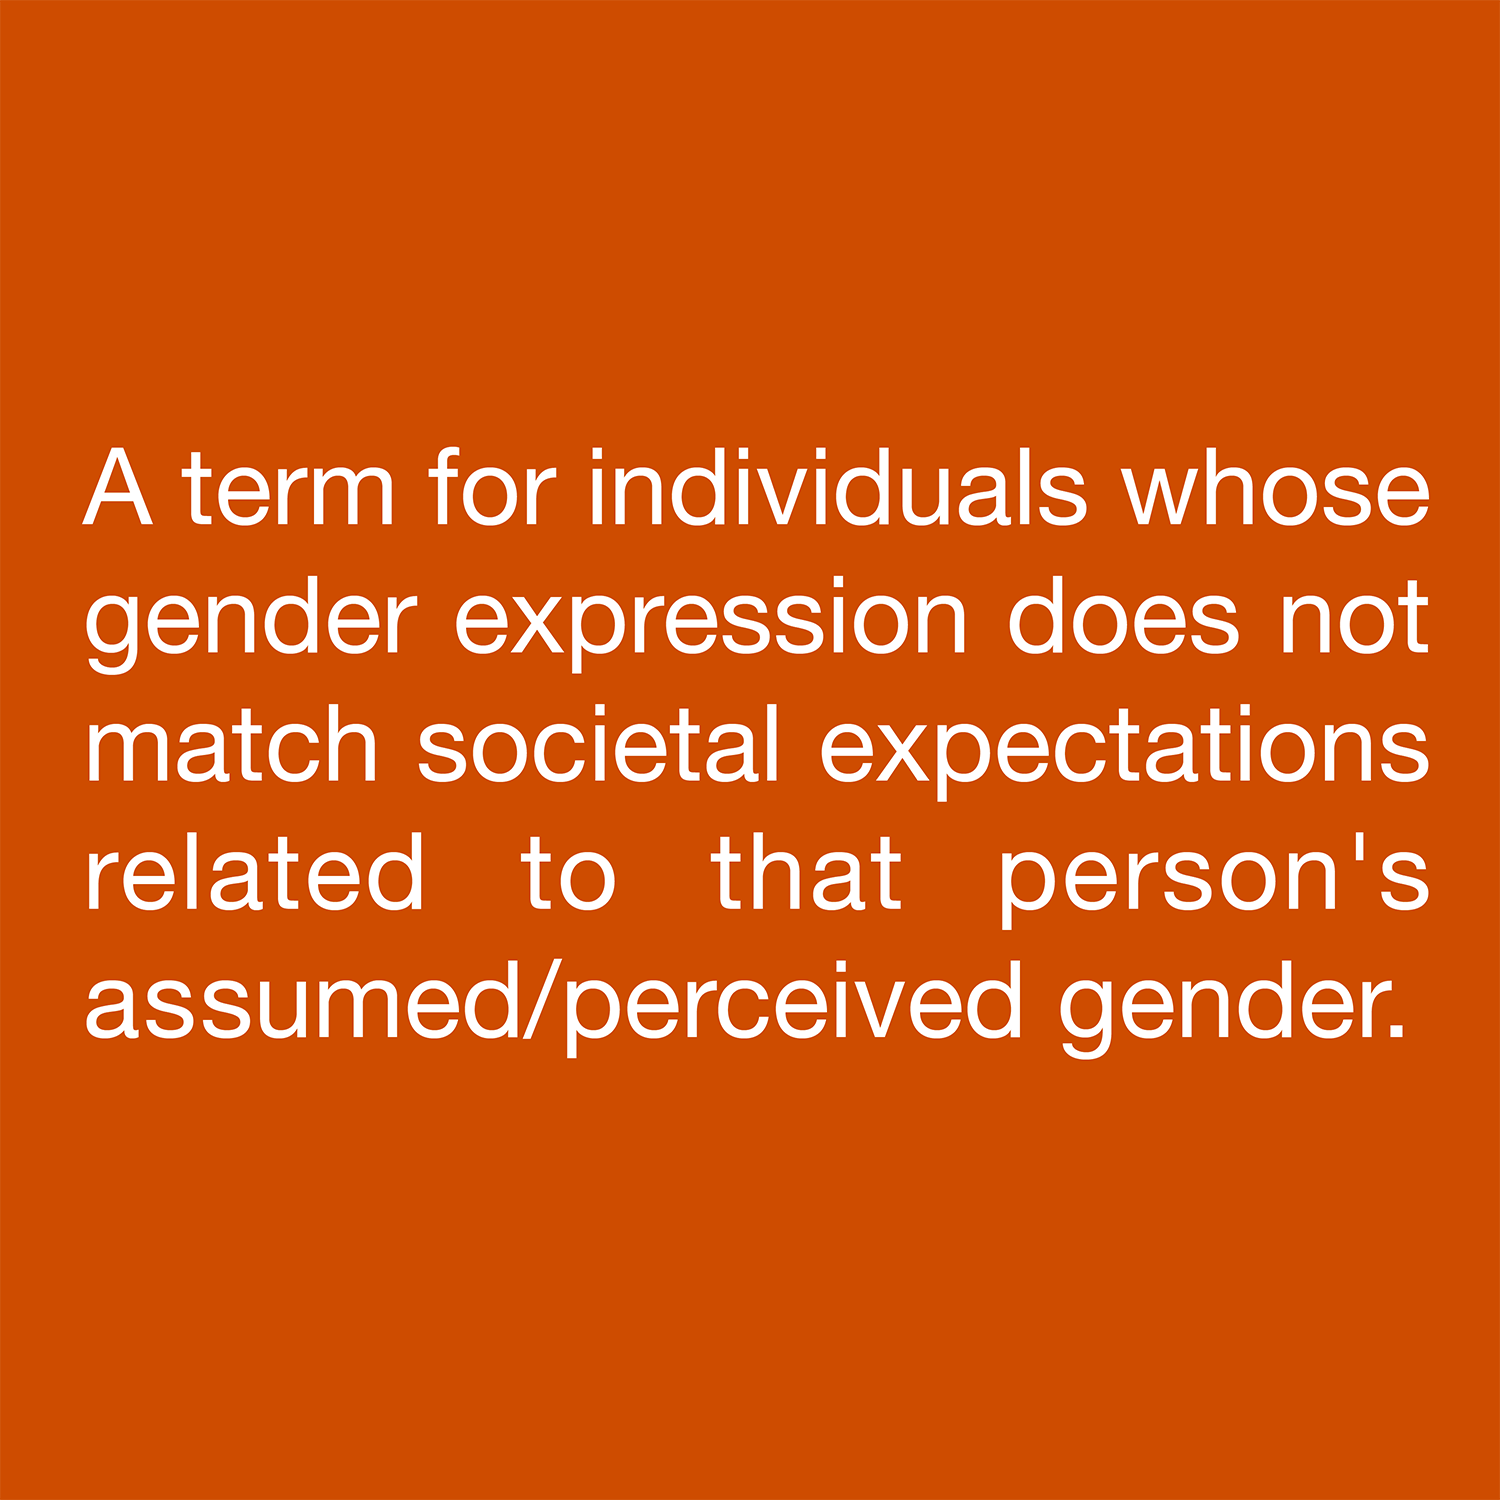  A term for individuals whose gender expression does not match societal expectations related to that person's assumed/perceived gender. 